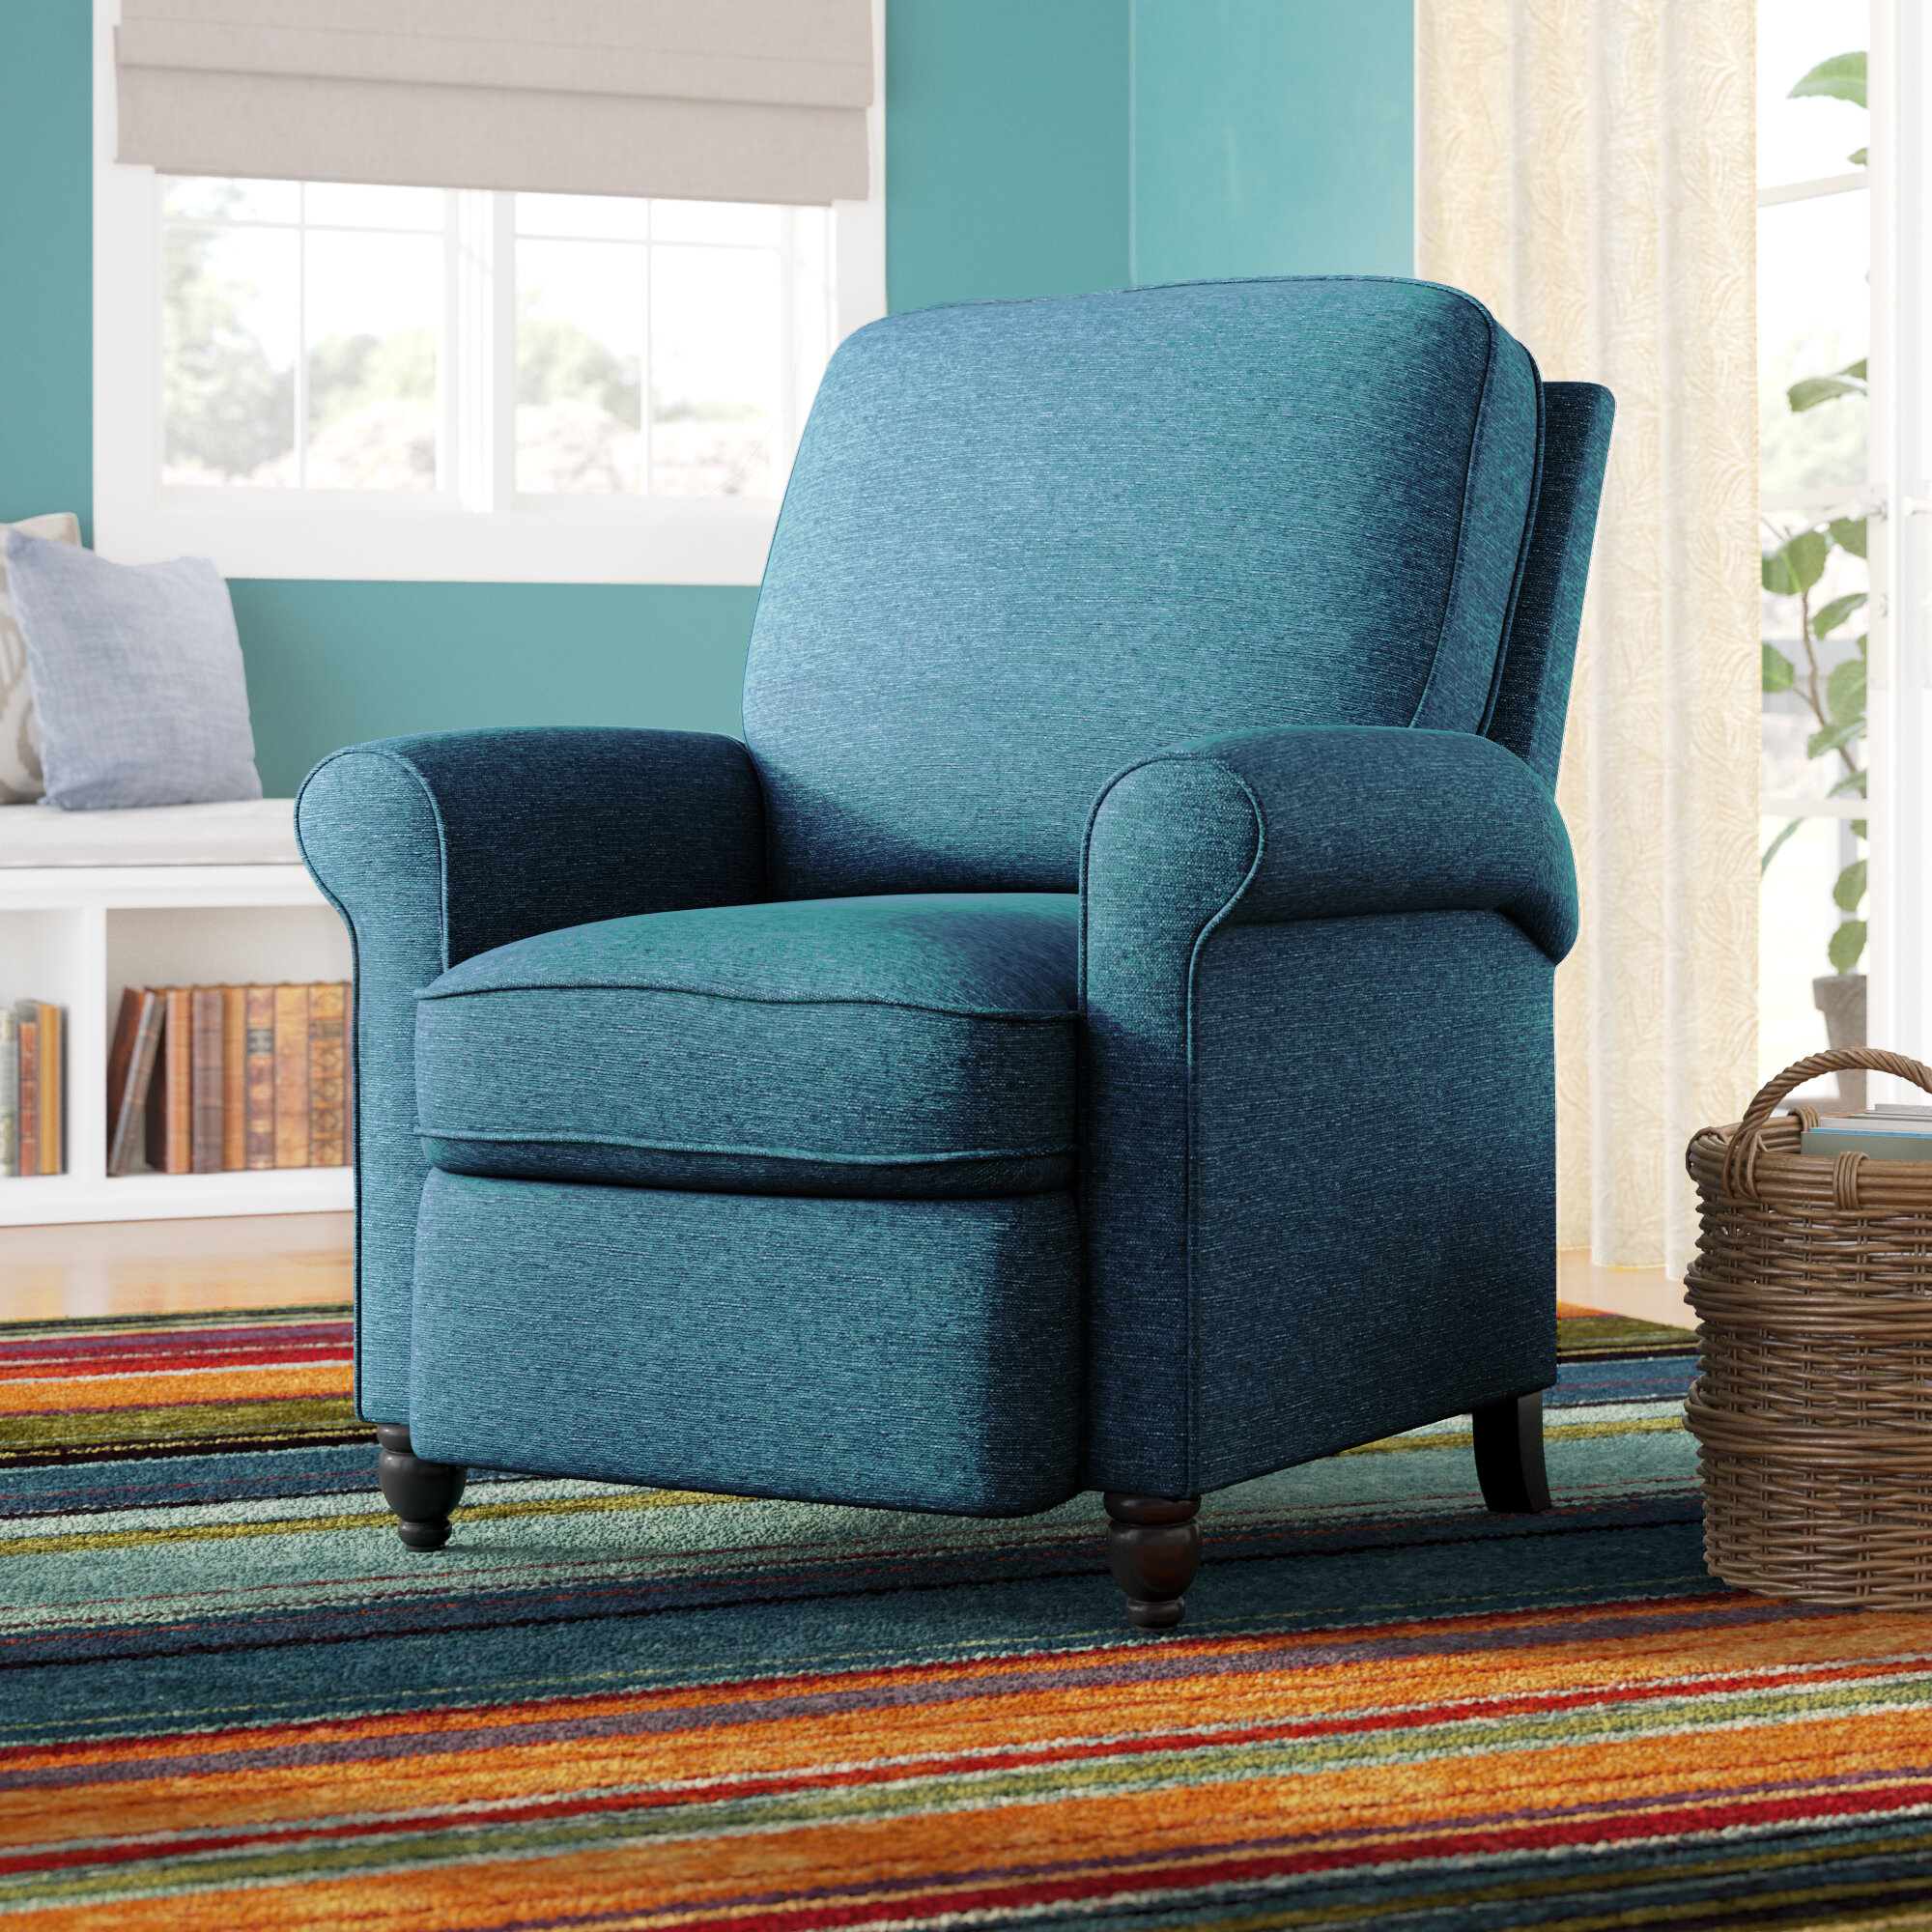 Chairs & Recliners Sale You'll Love | Wayfair